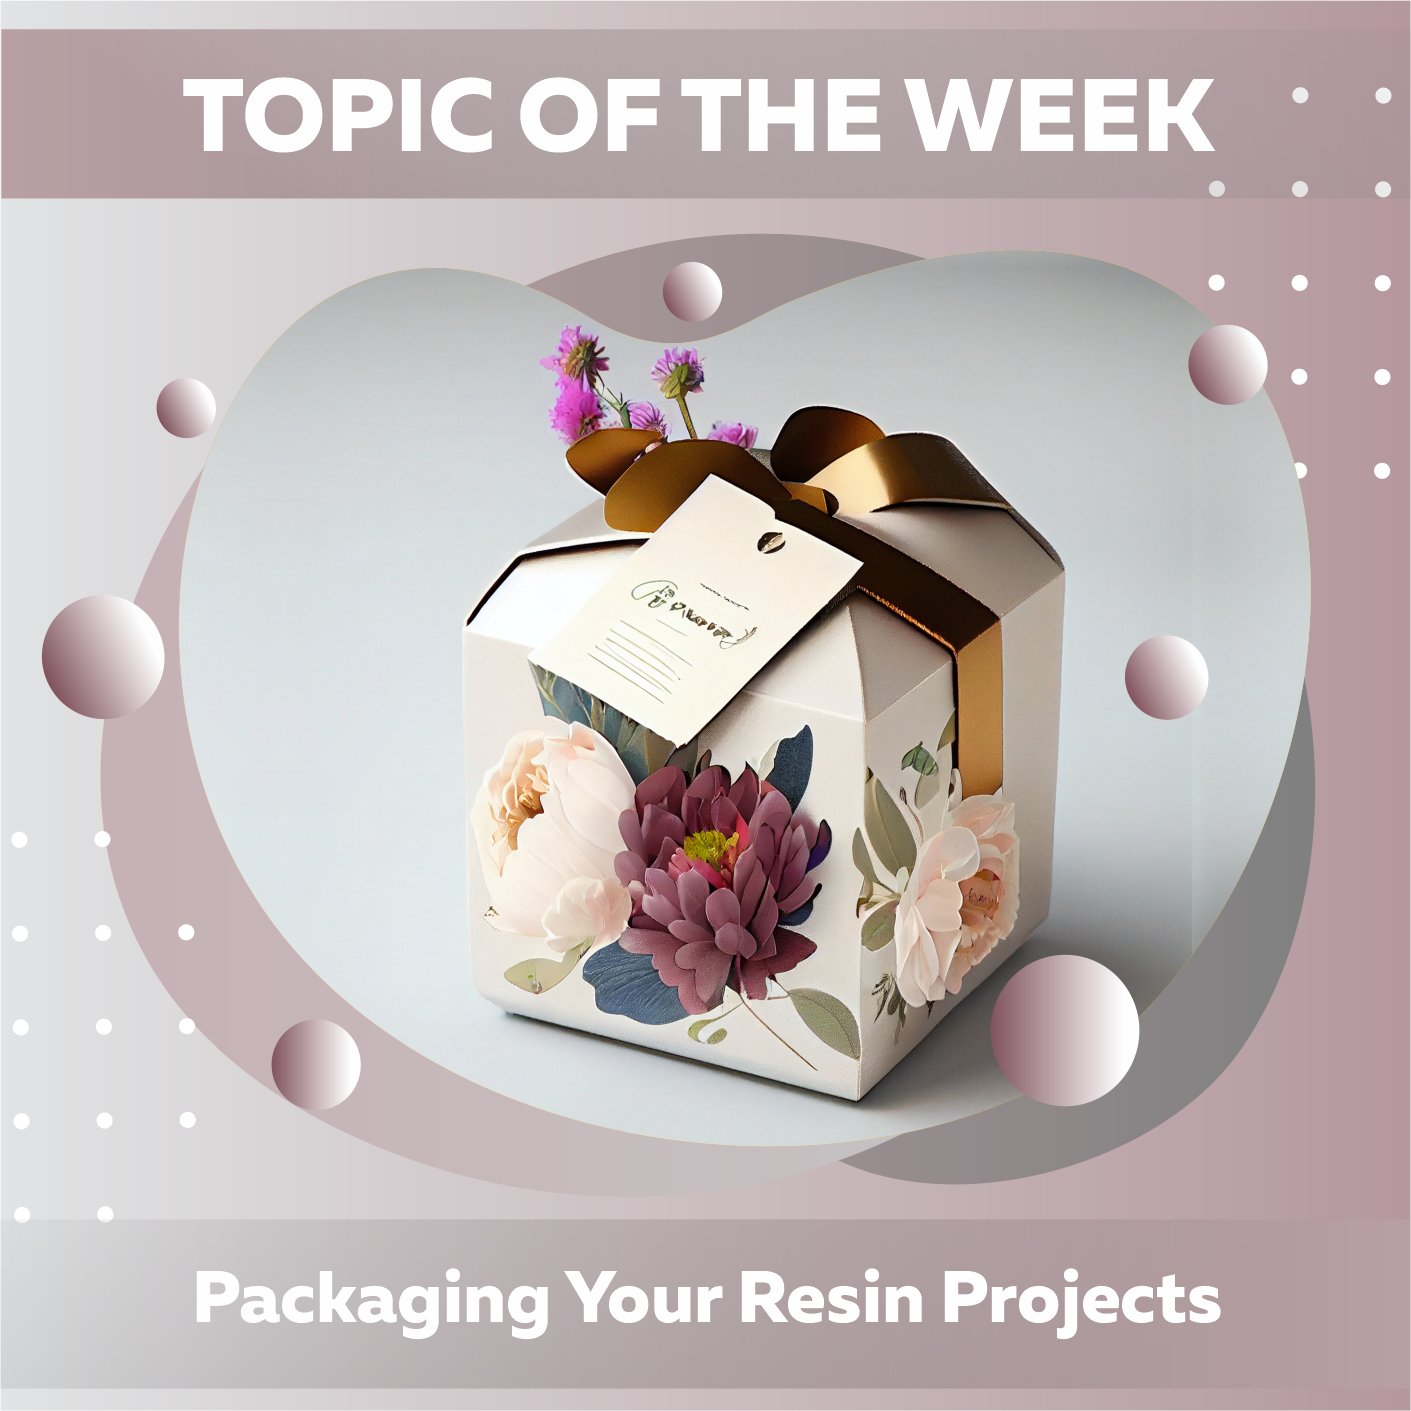 Packaging Your Resin Projects - Craft Resin